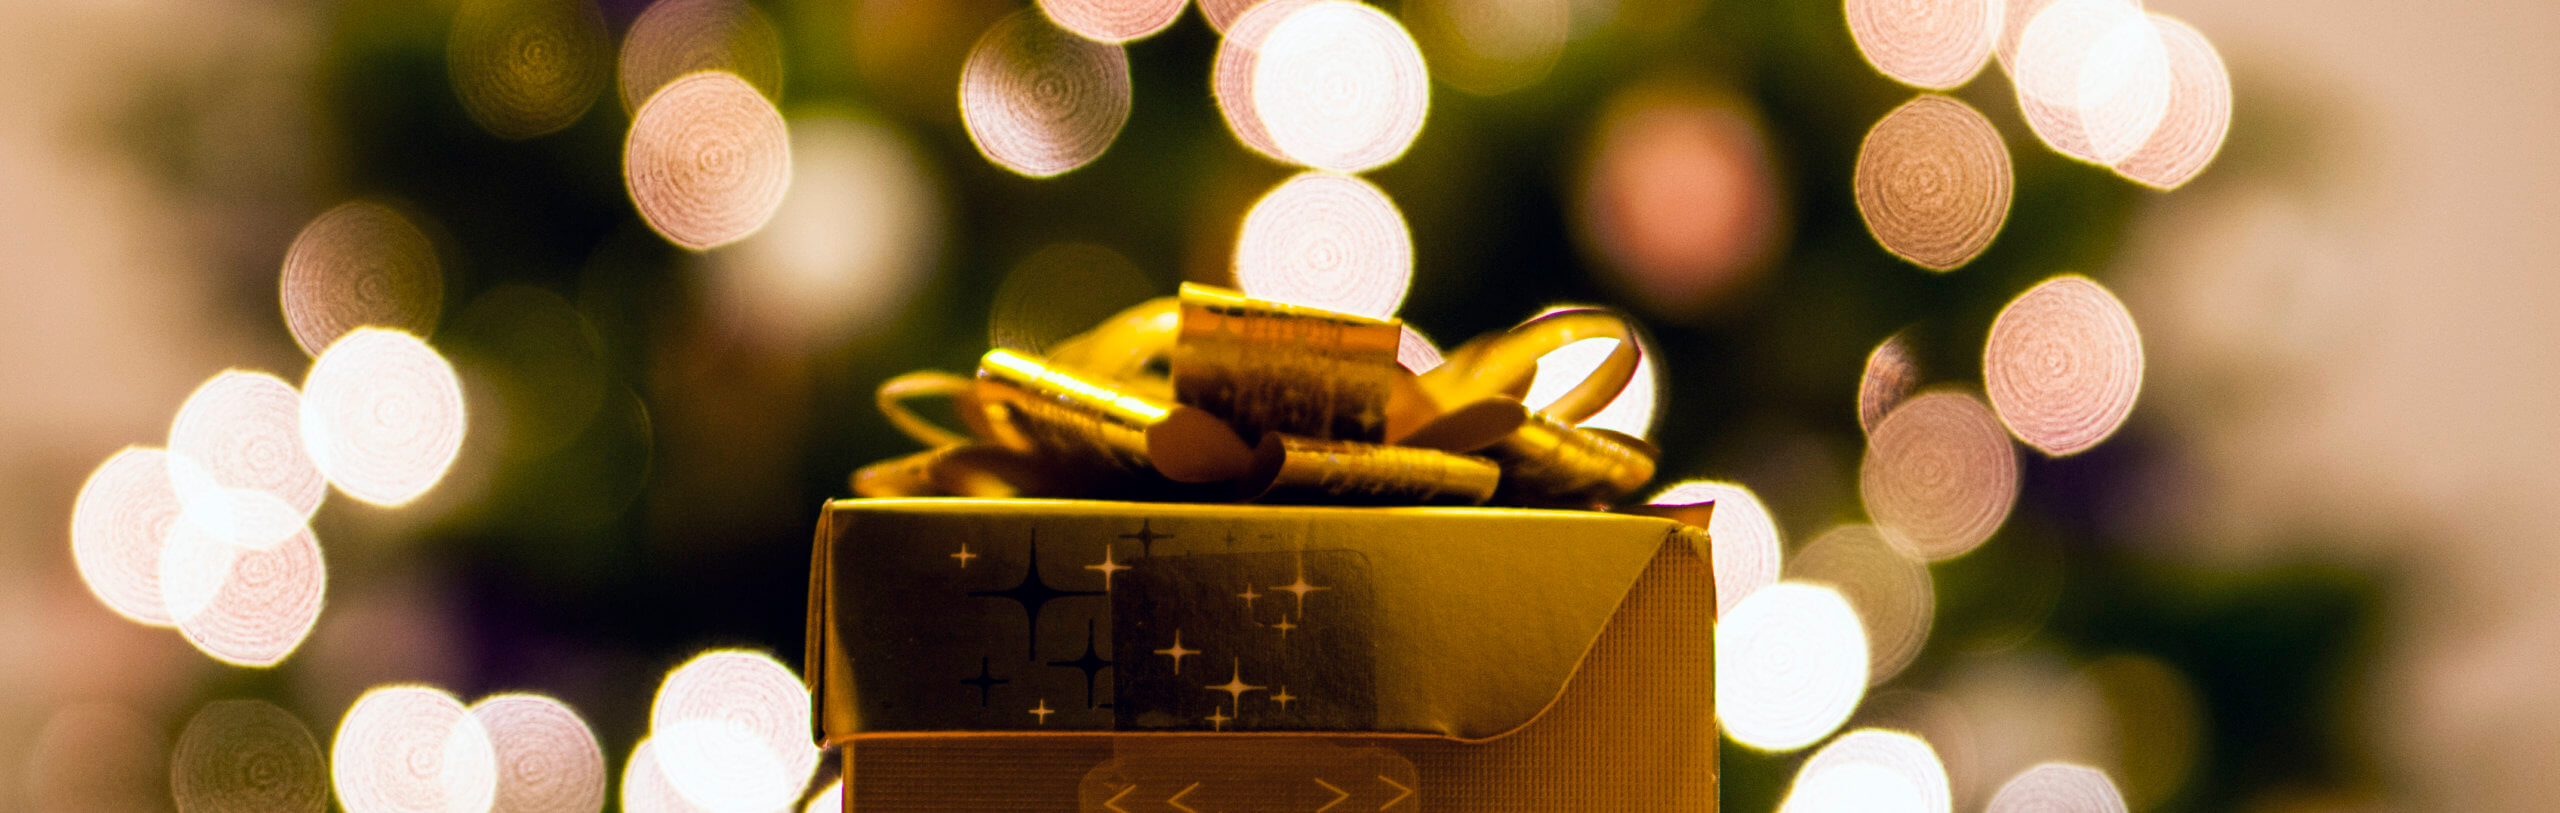 A present that represents the ways your business can give back this holiday season.